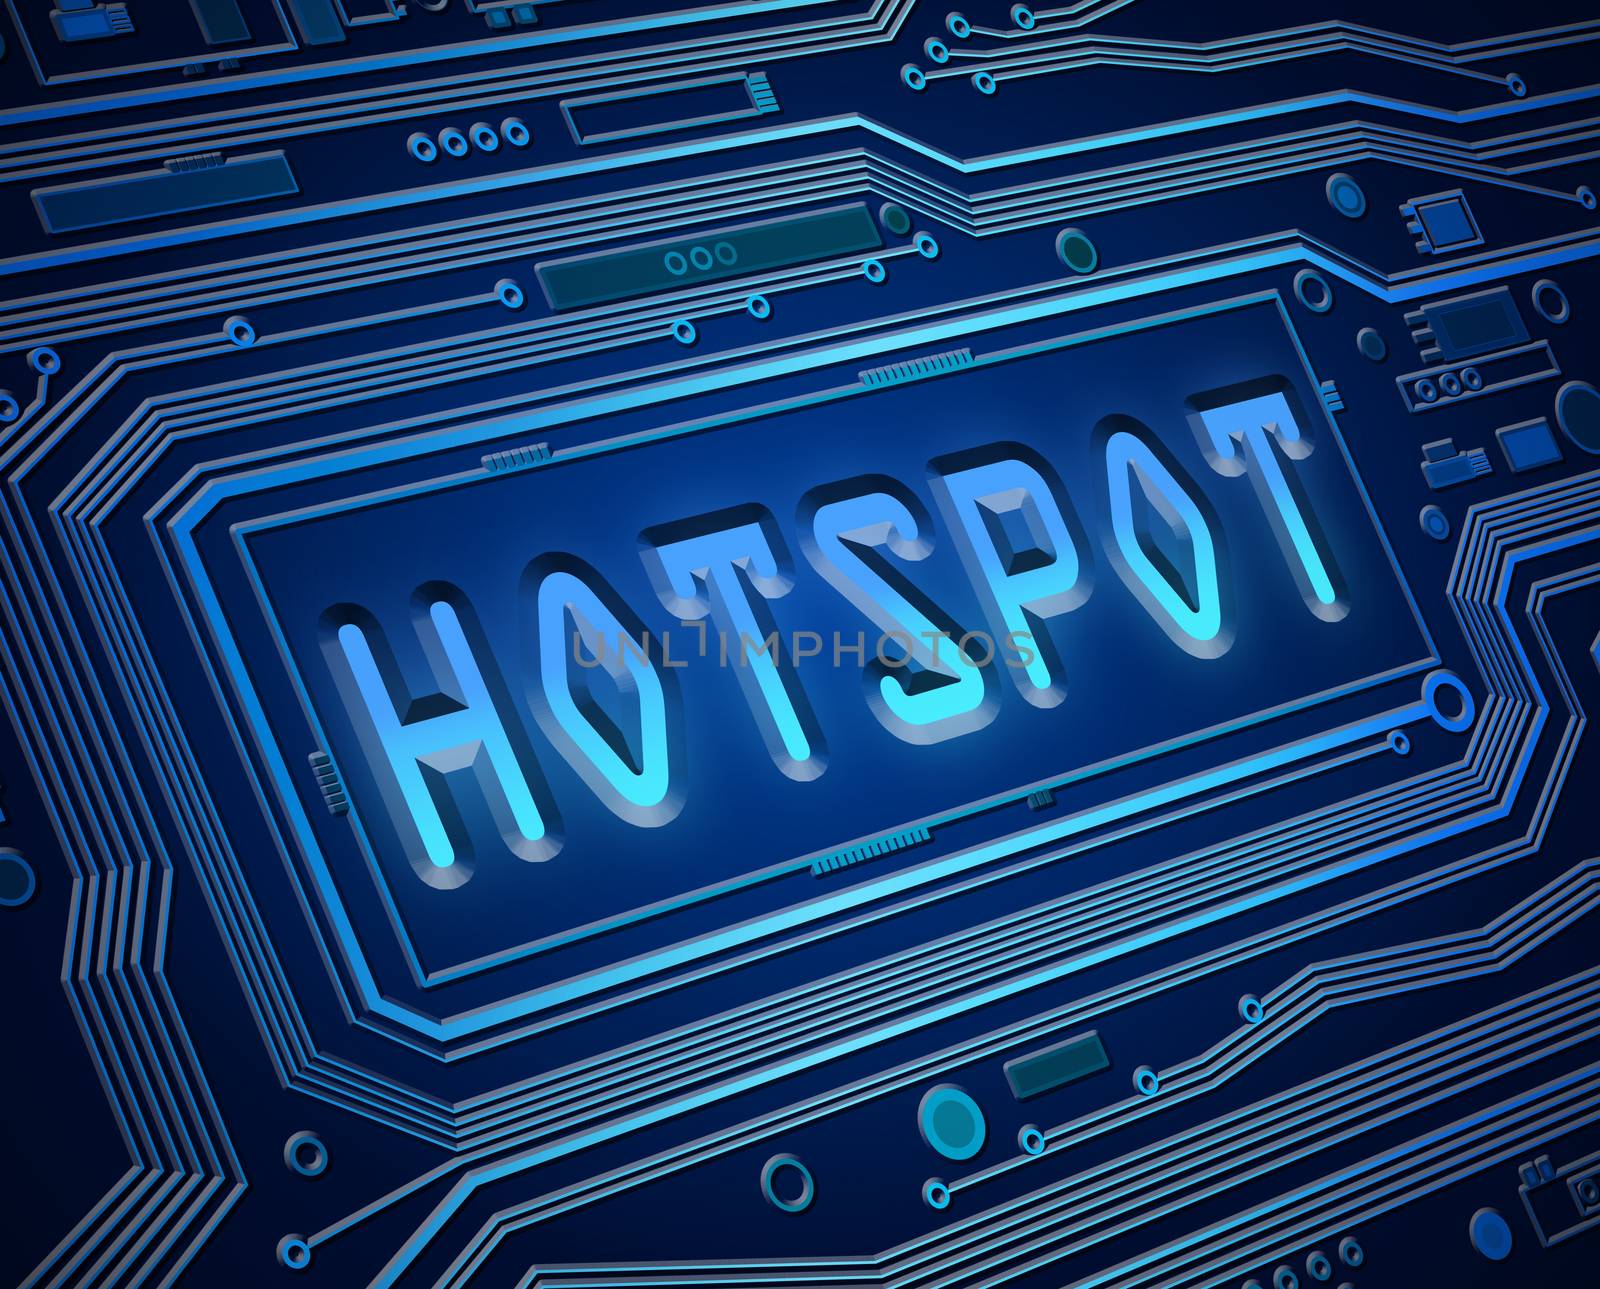 Abstract style illustration depicting printed circuit board components with a hotspot concept.